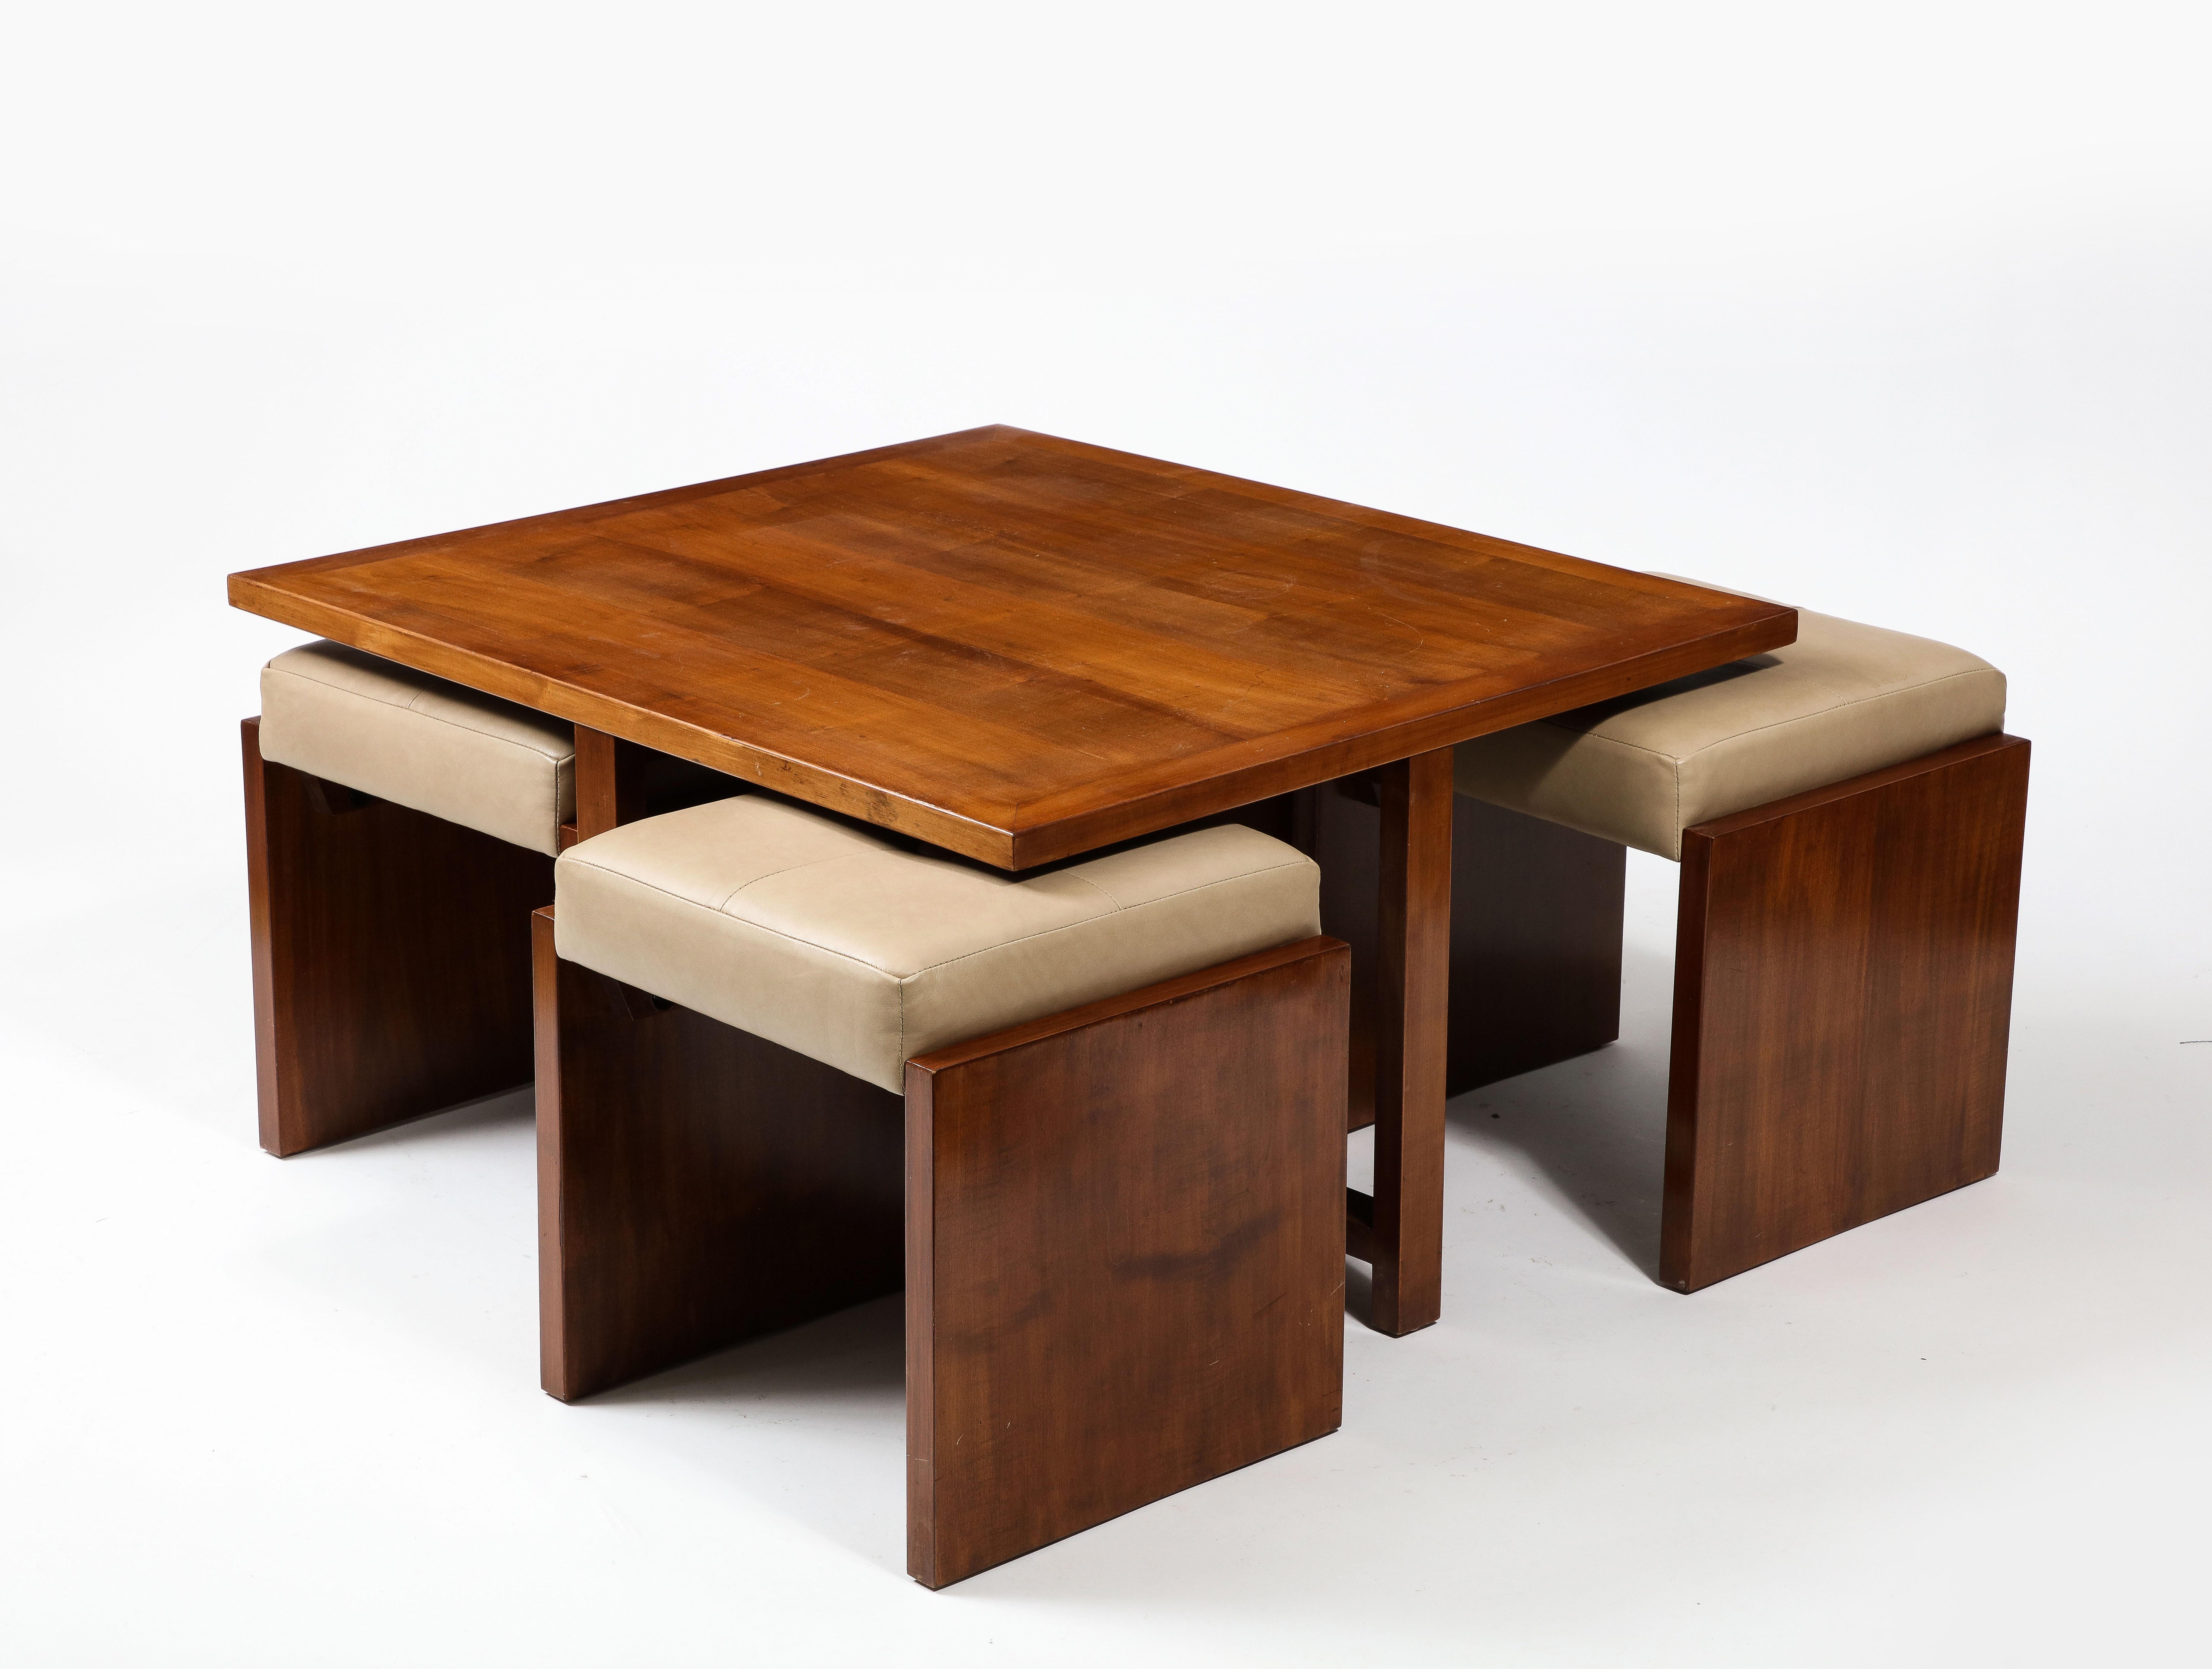 Upholstery Square Walnut Coffee Table with Four Nesting Upholstered Stools, France 1940's For Sale